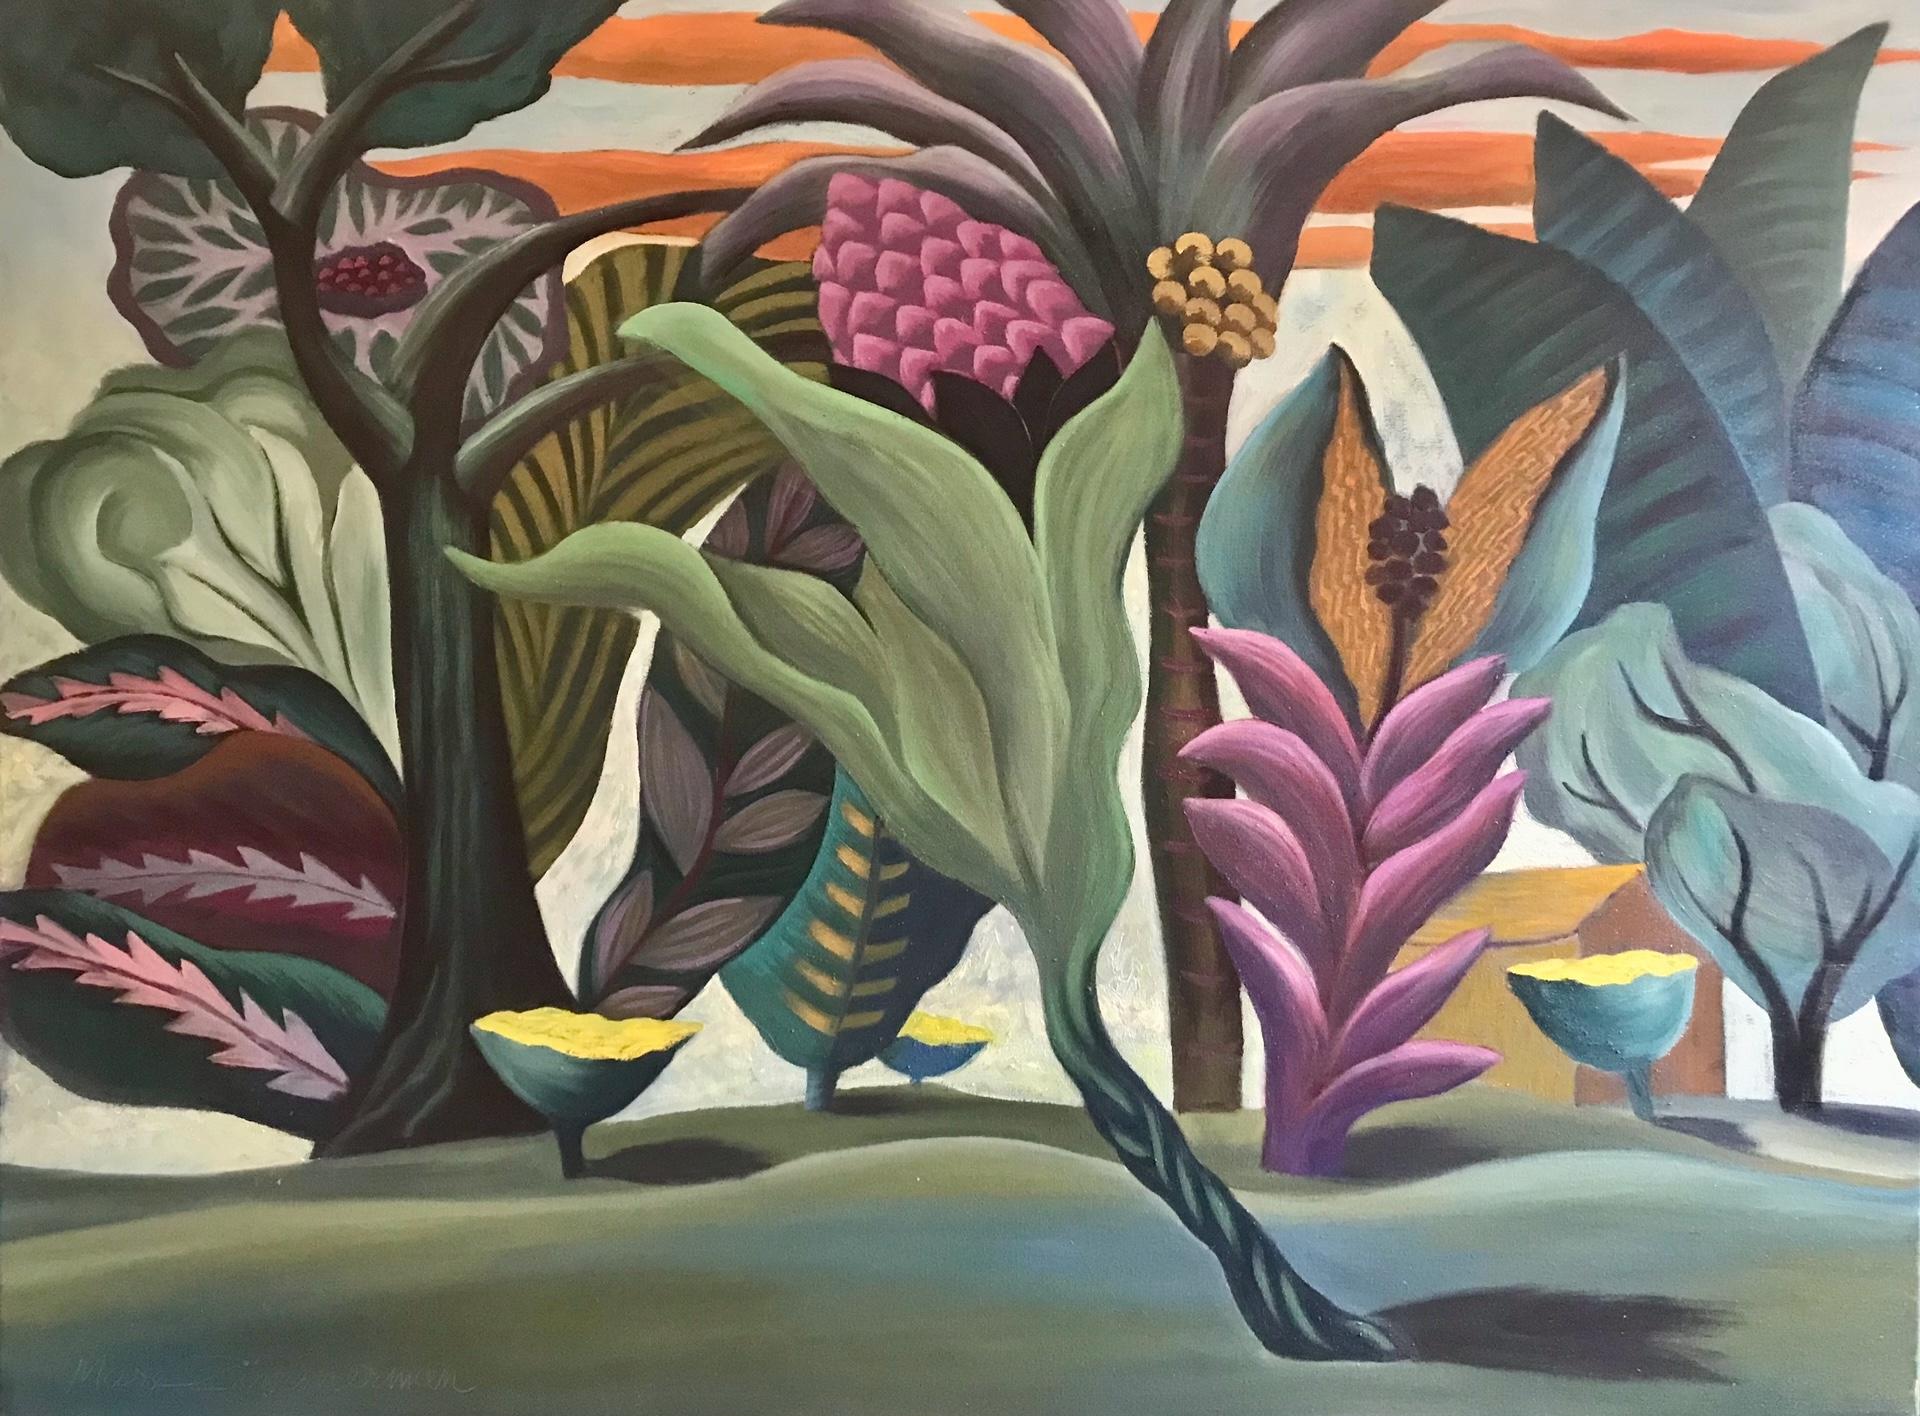 Surreal Jungle - Landscape Painting - Conceptual Art By Marc Zimmerman

This masterpiece is exhibited in the Zimmerman Gallery, Carmel CA.


Marc Zimmerman creates playful paintings, whether deep mysterious jungle or delightfully whimsical florals.